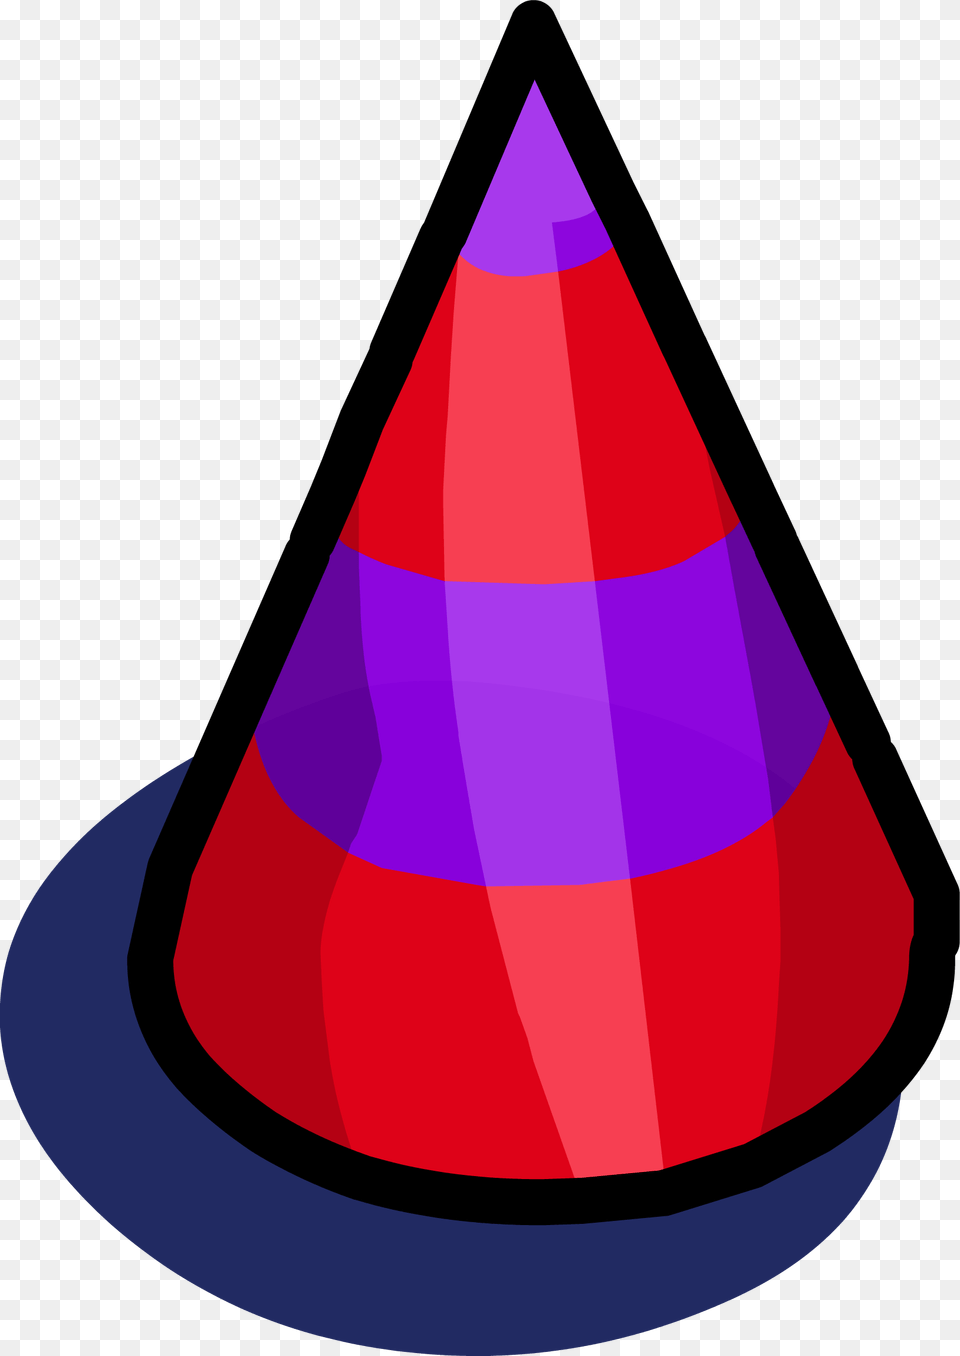 9th Anniversary Hat Cp Times Prohibido Fumar, Clothing, Cone Png Image